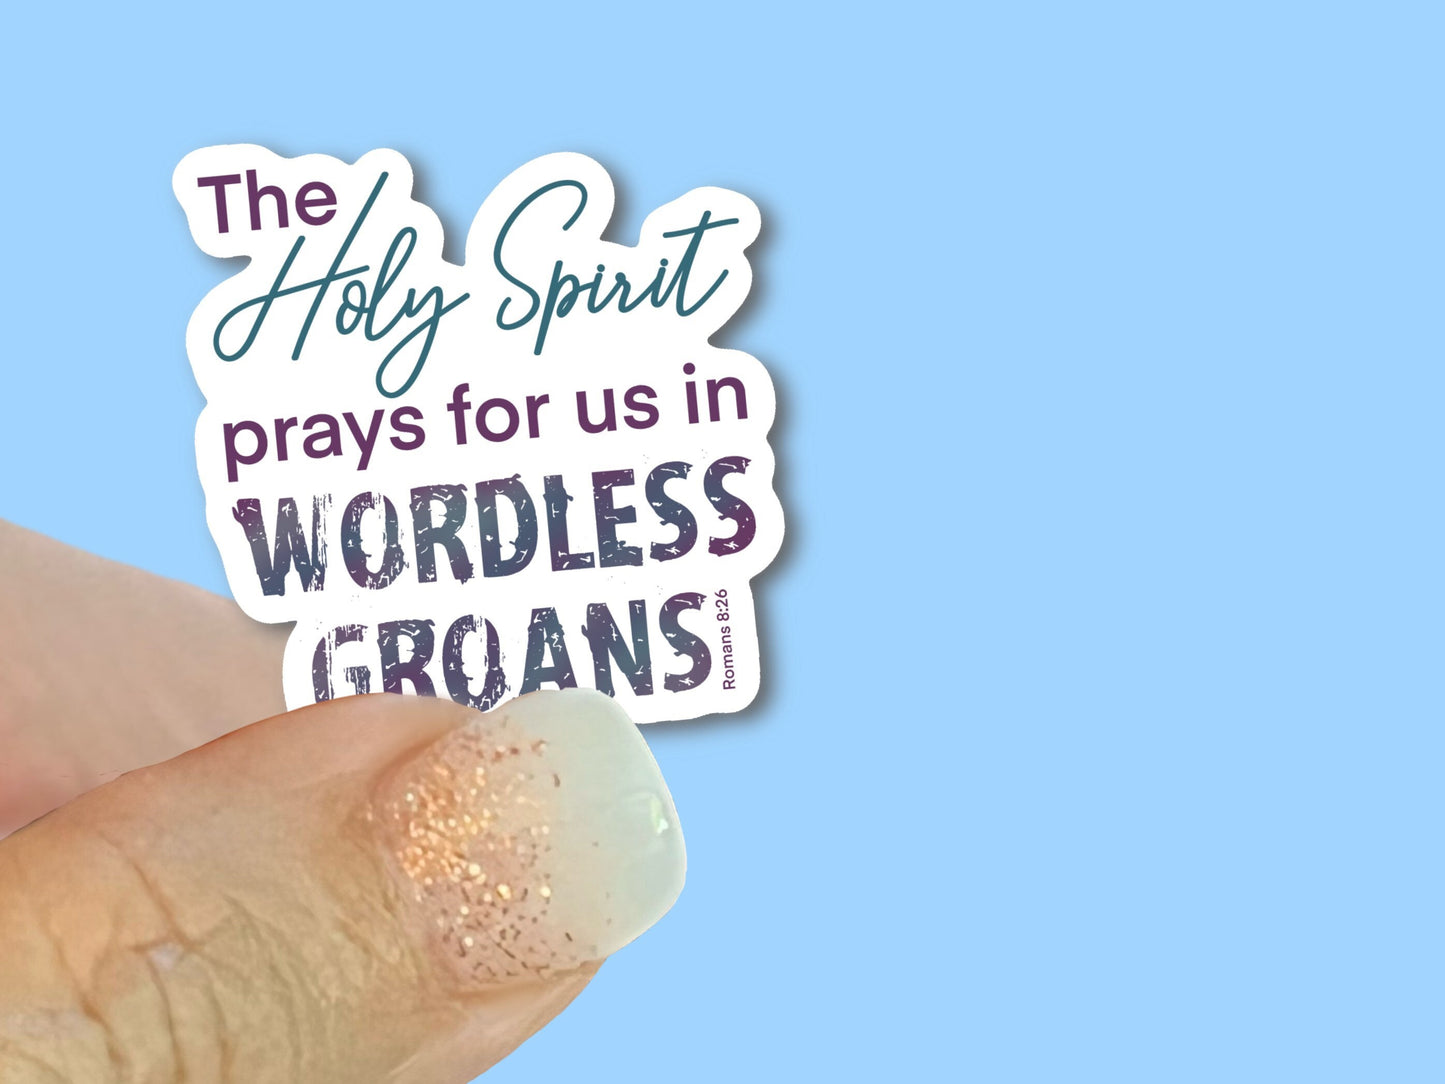 The Holy Spirit prays for us in Wordless Groans, Romans 8:26 - Christian Faith UV/ Waterproof Vinyl Sticker/ Decal- Choice of Size